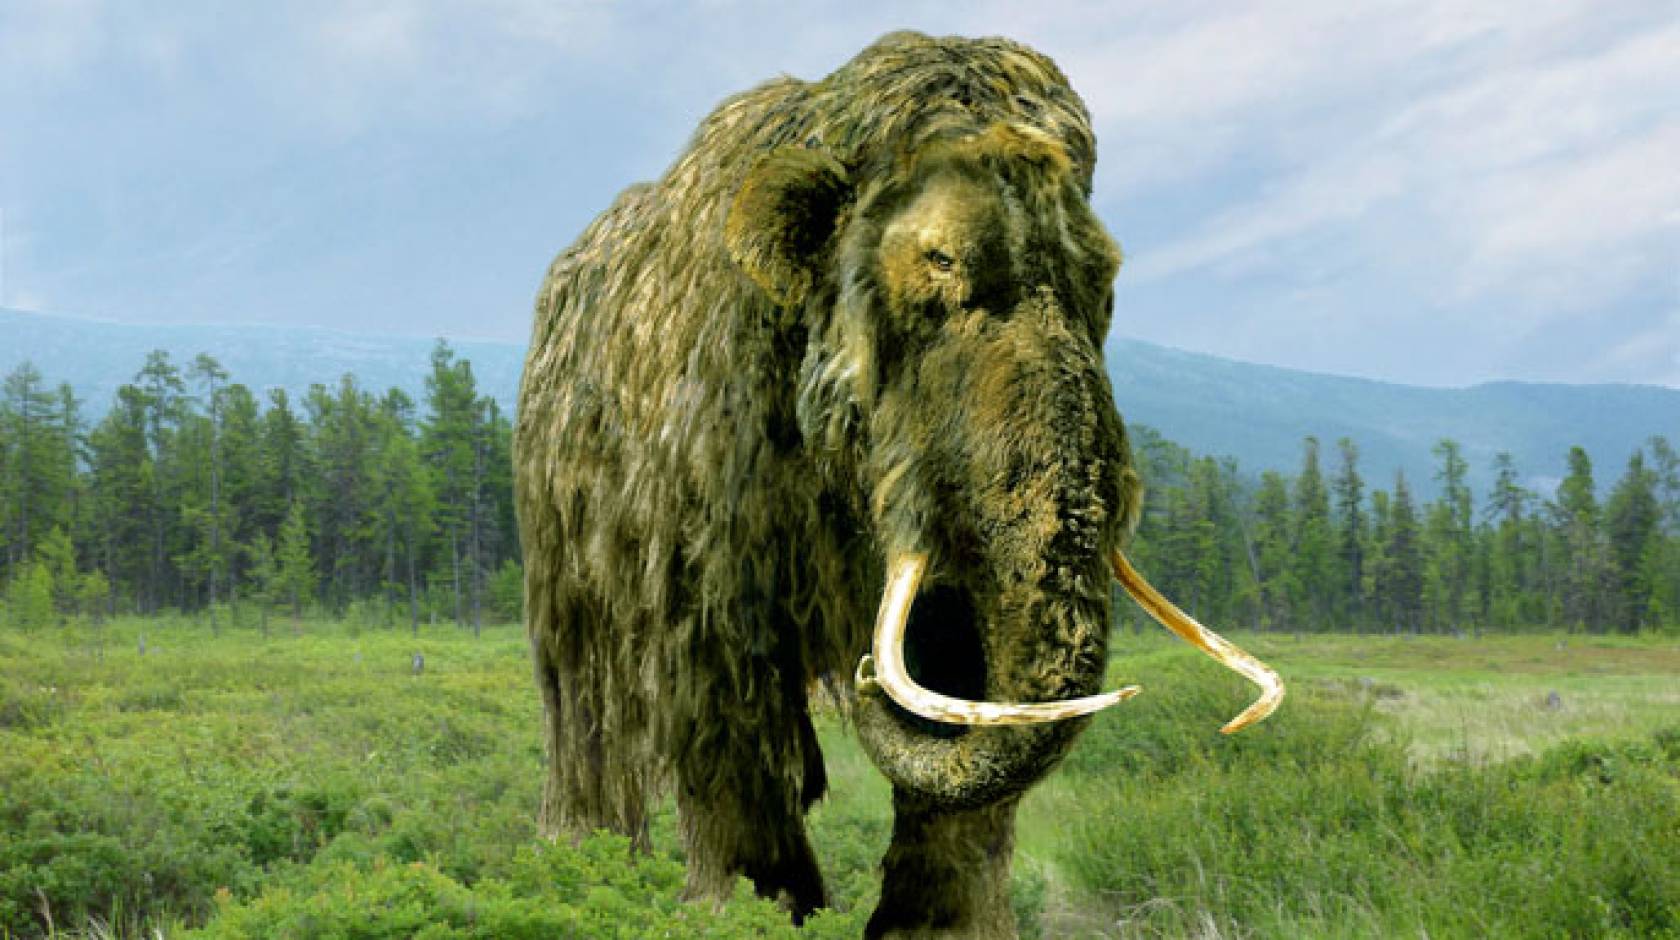 Should we bring back the Woolly Mammoth? University of California